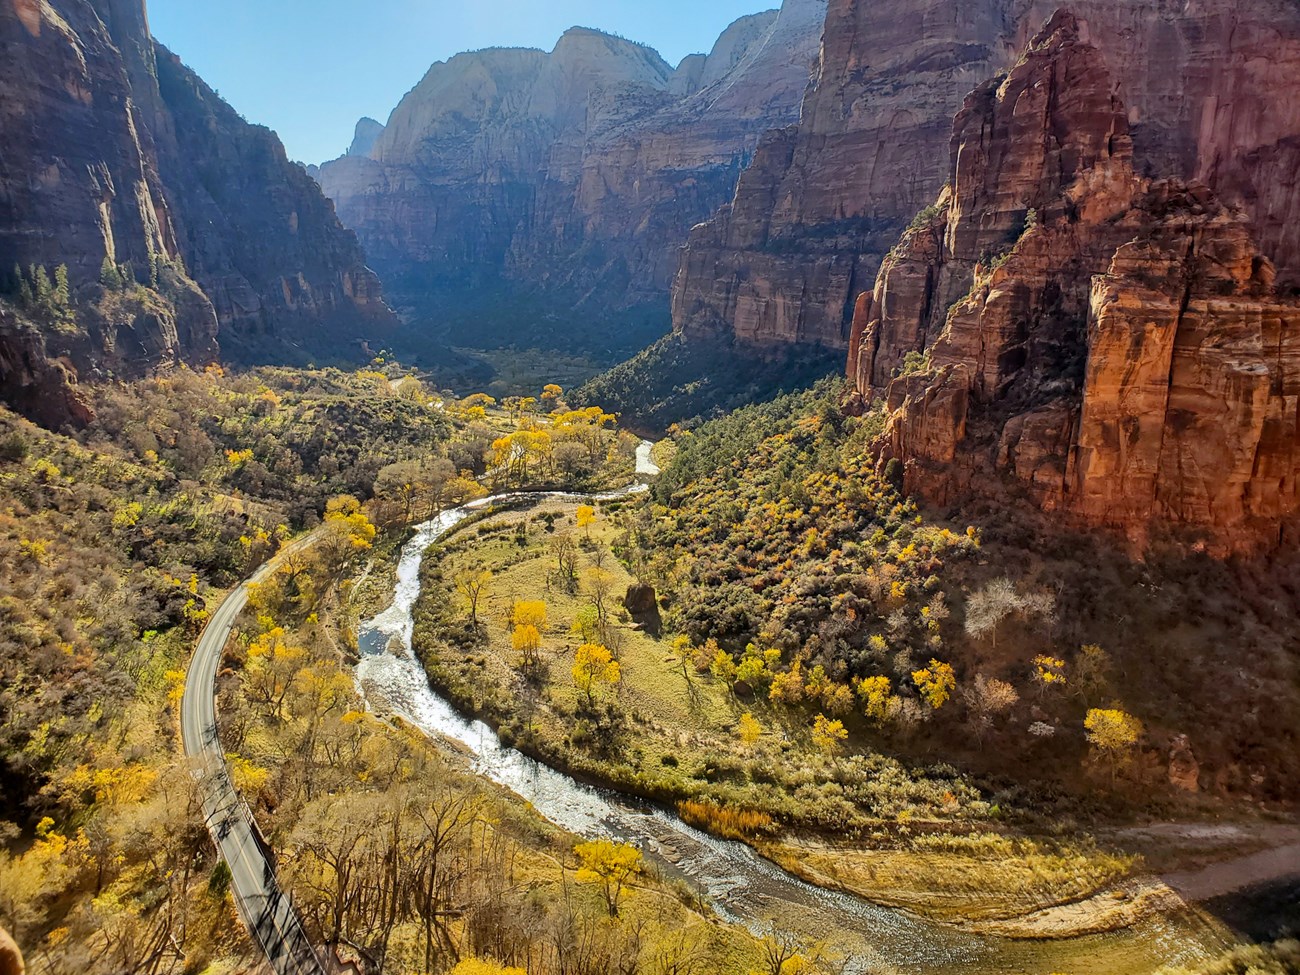 A bird's eye view of the Big Bend area of the park.